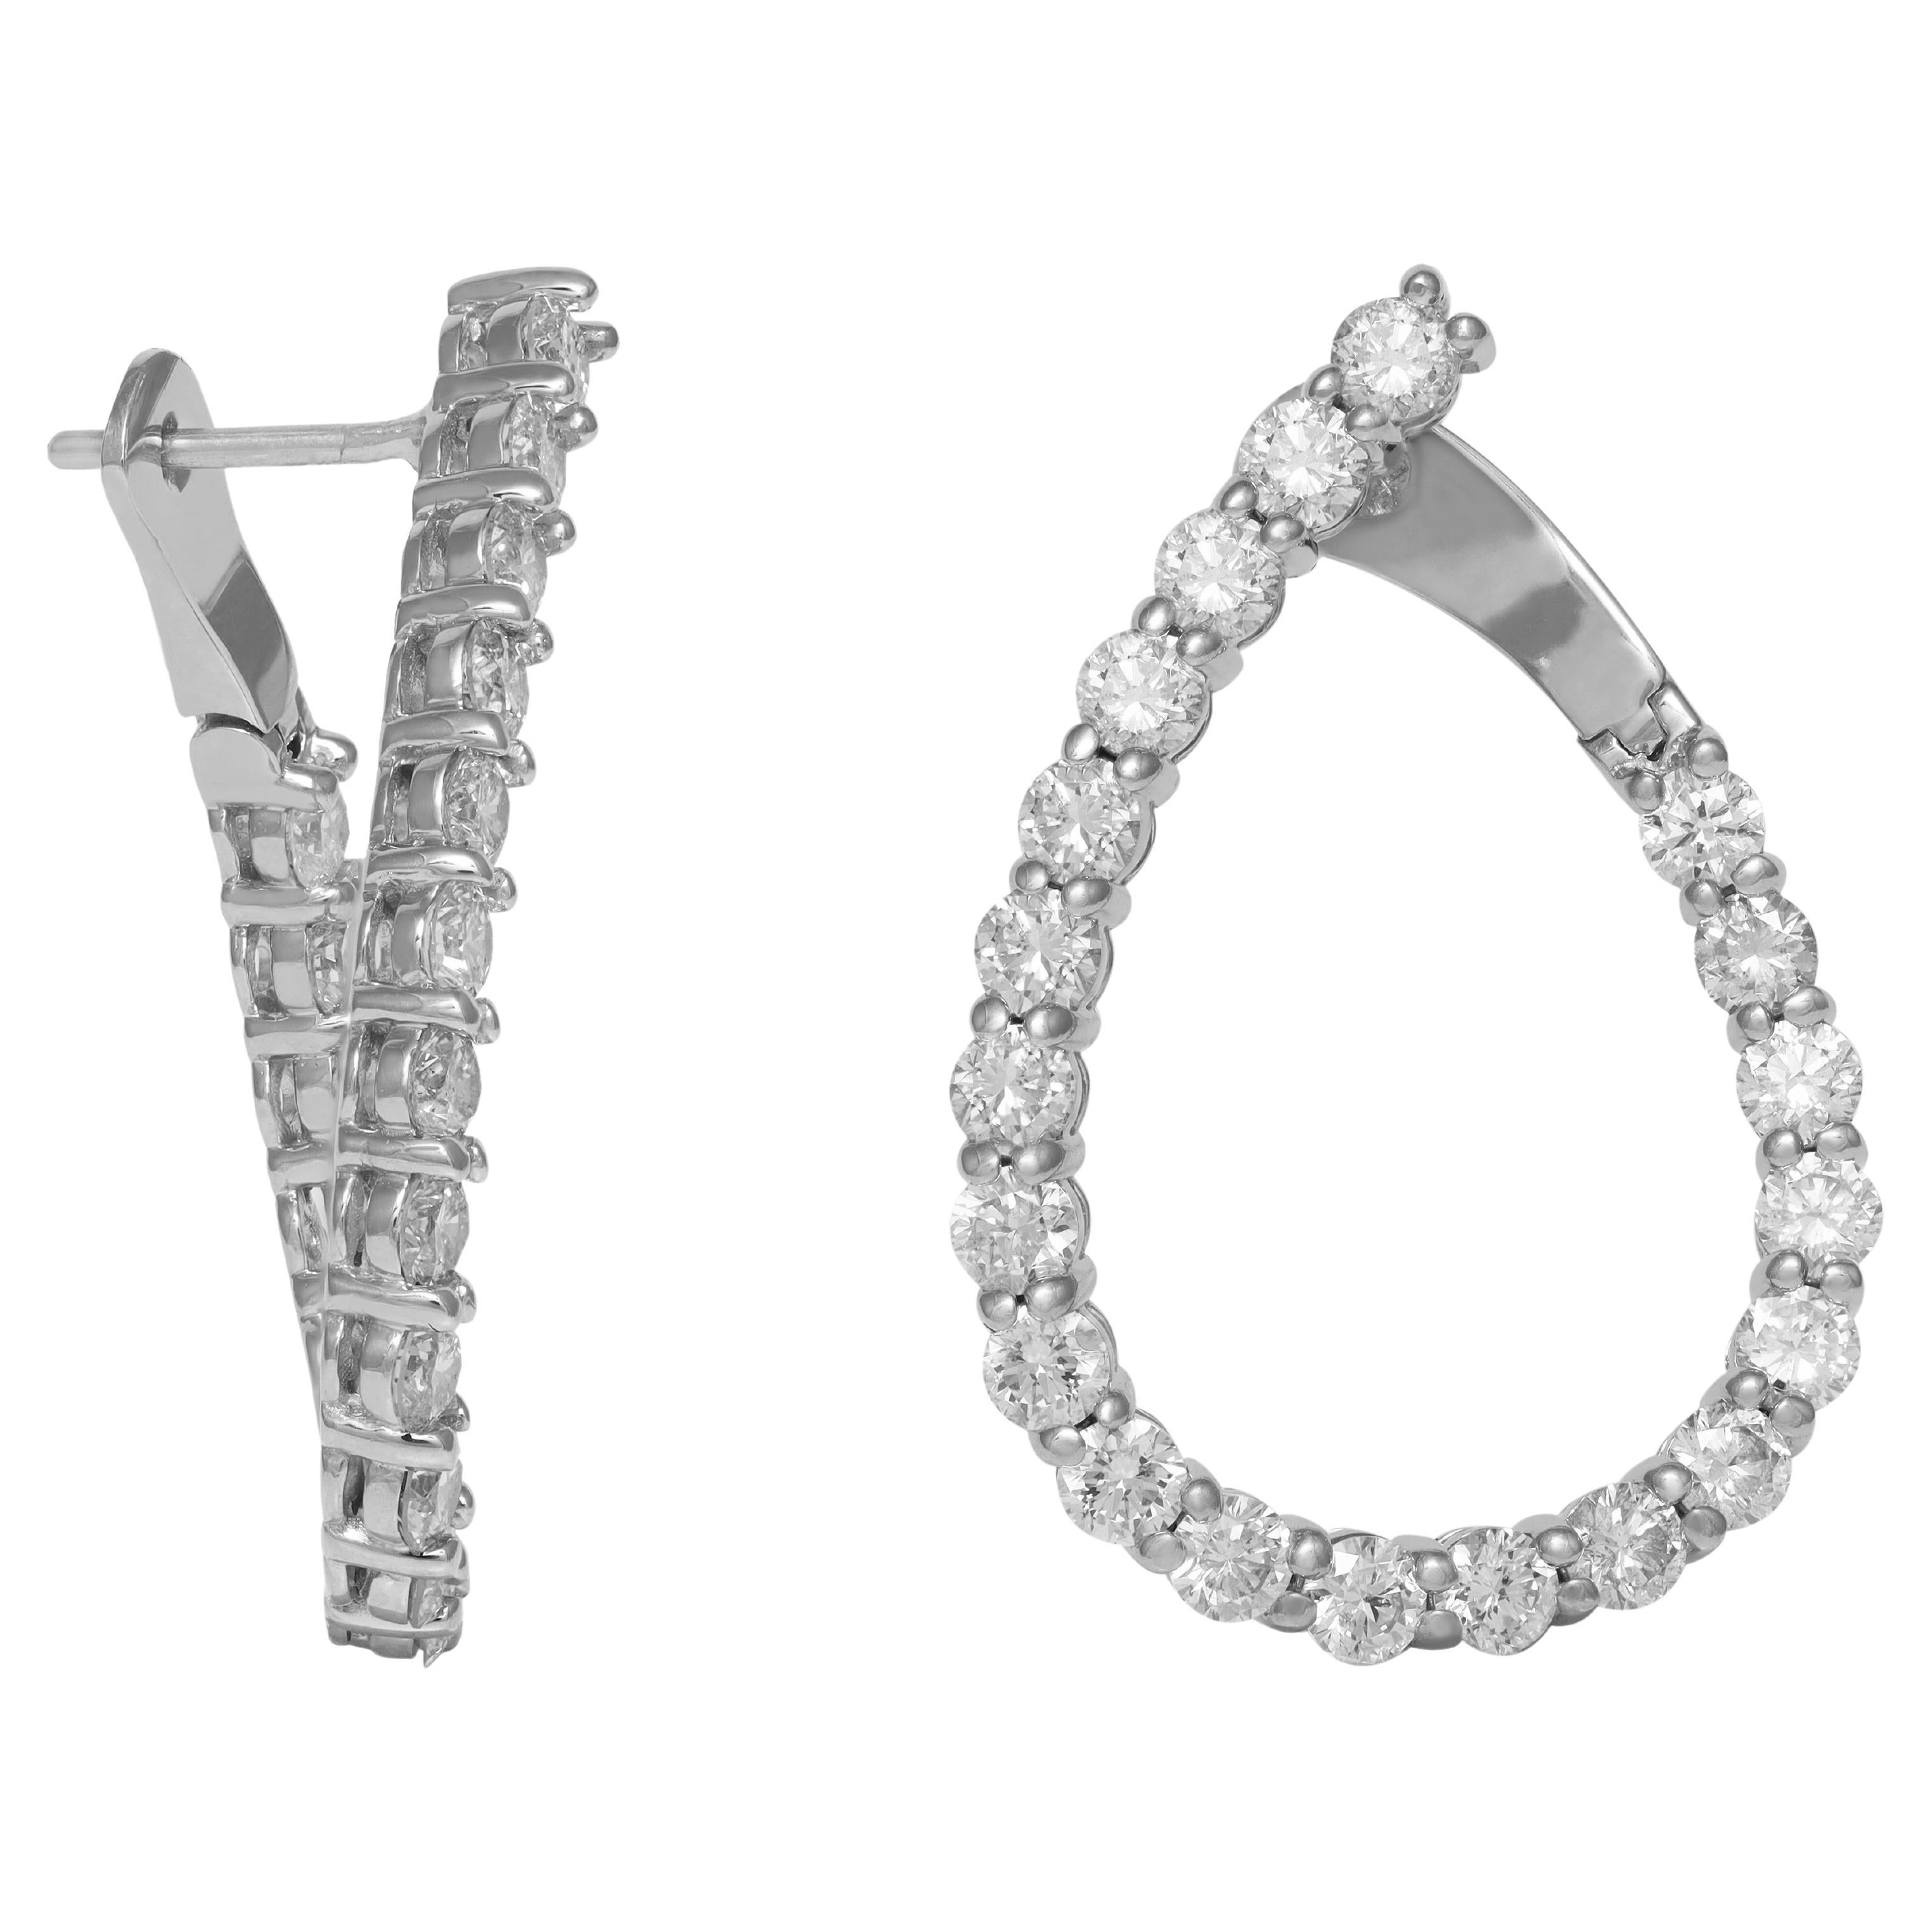 Diana M. 14kt white gold fashion earrings featuring 3.60 cts tw of round diamond For Sale